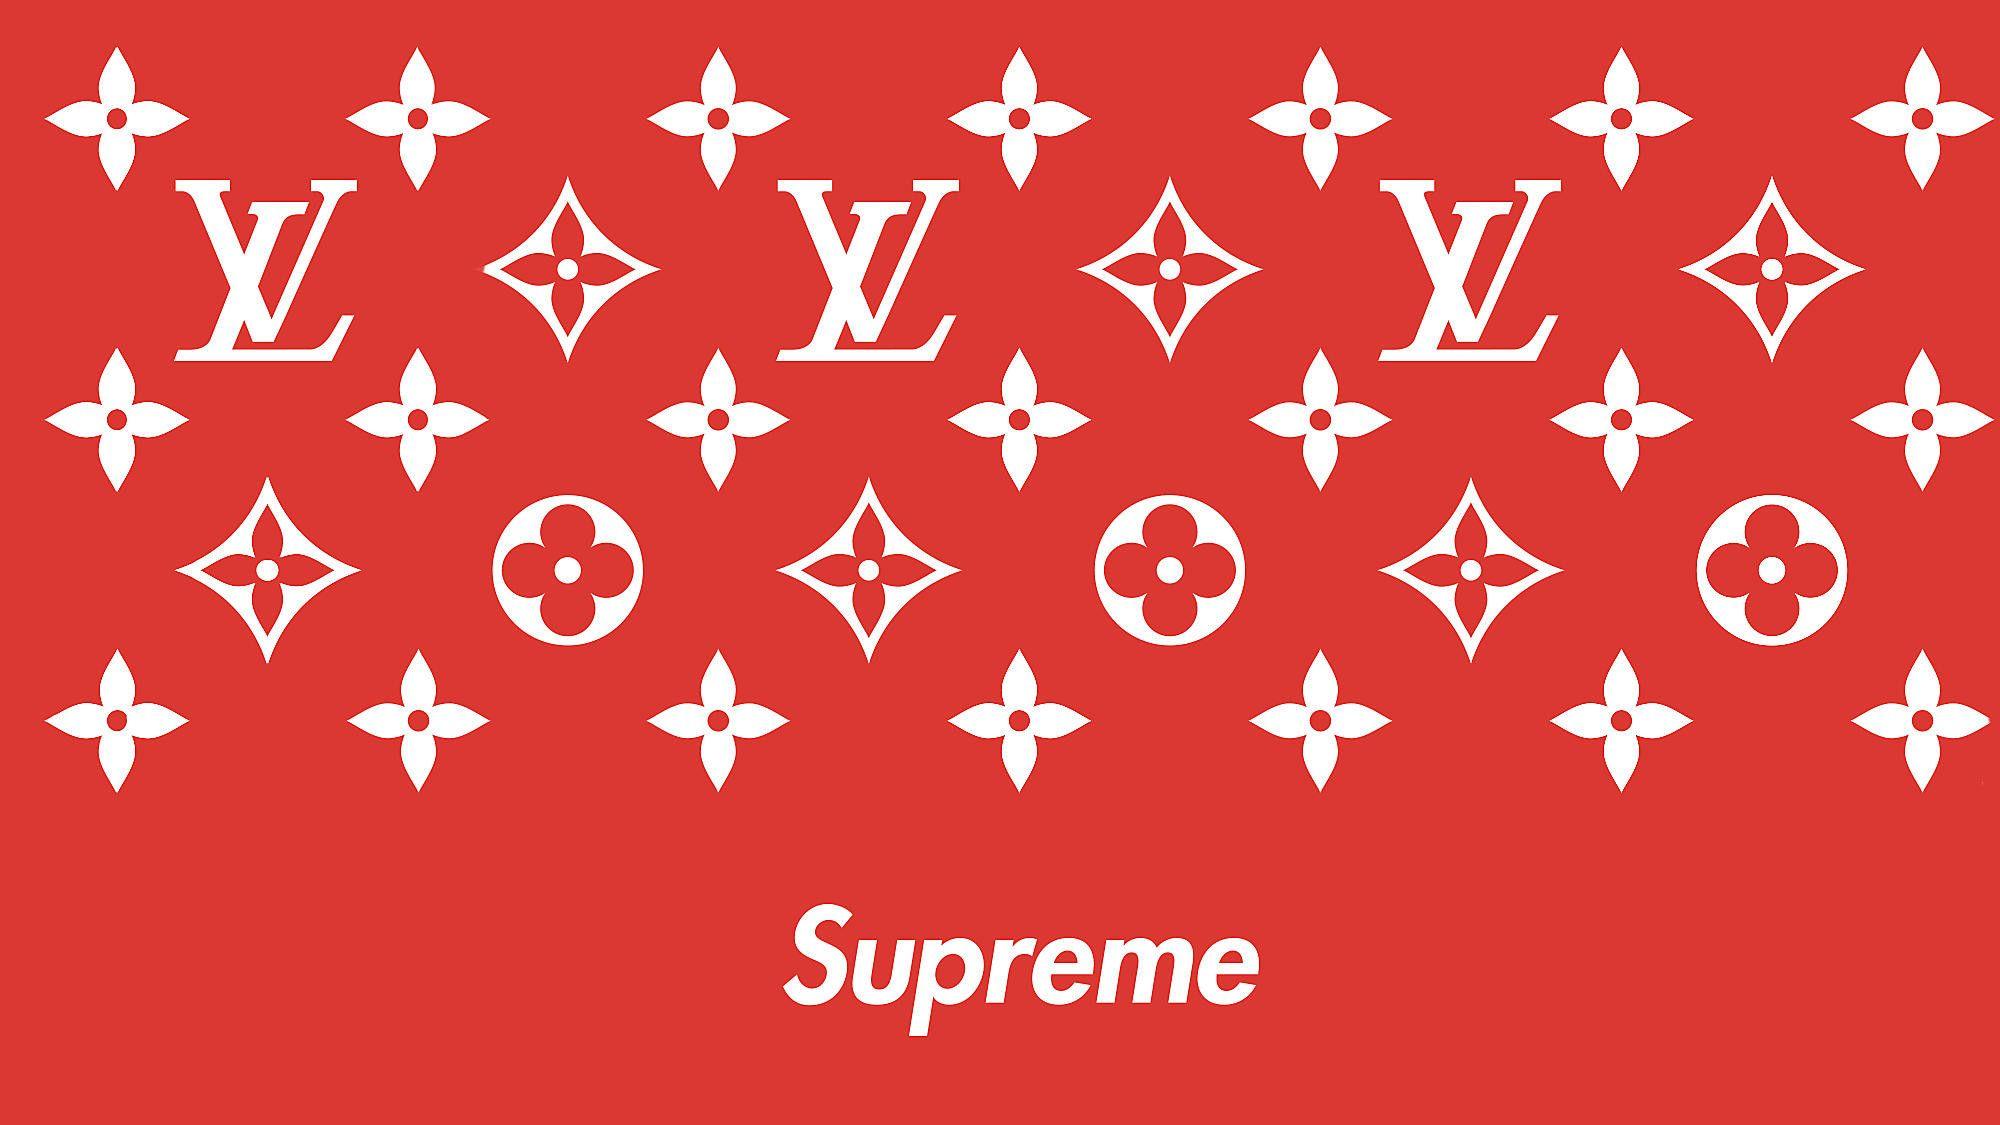 LV X Supreme Wallpapers - Top Free LV X Supreme Backgrounds ...